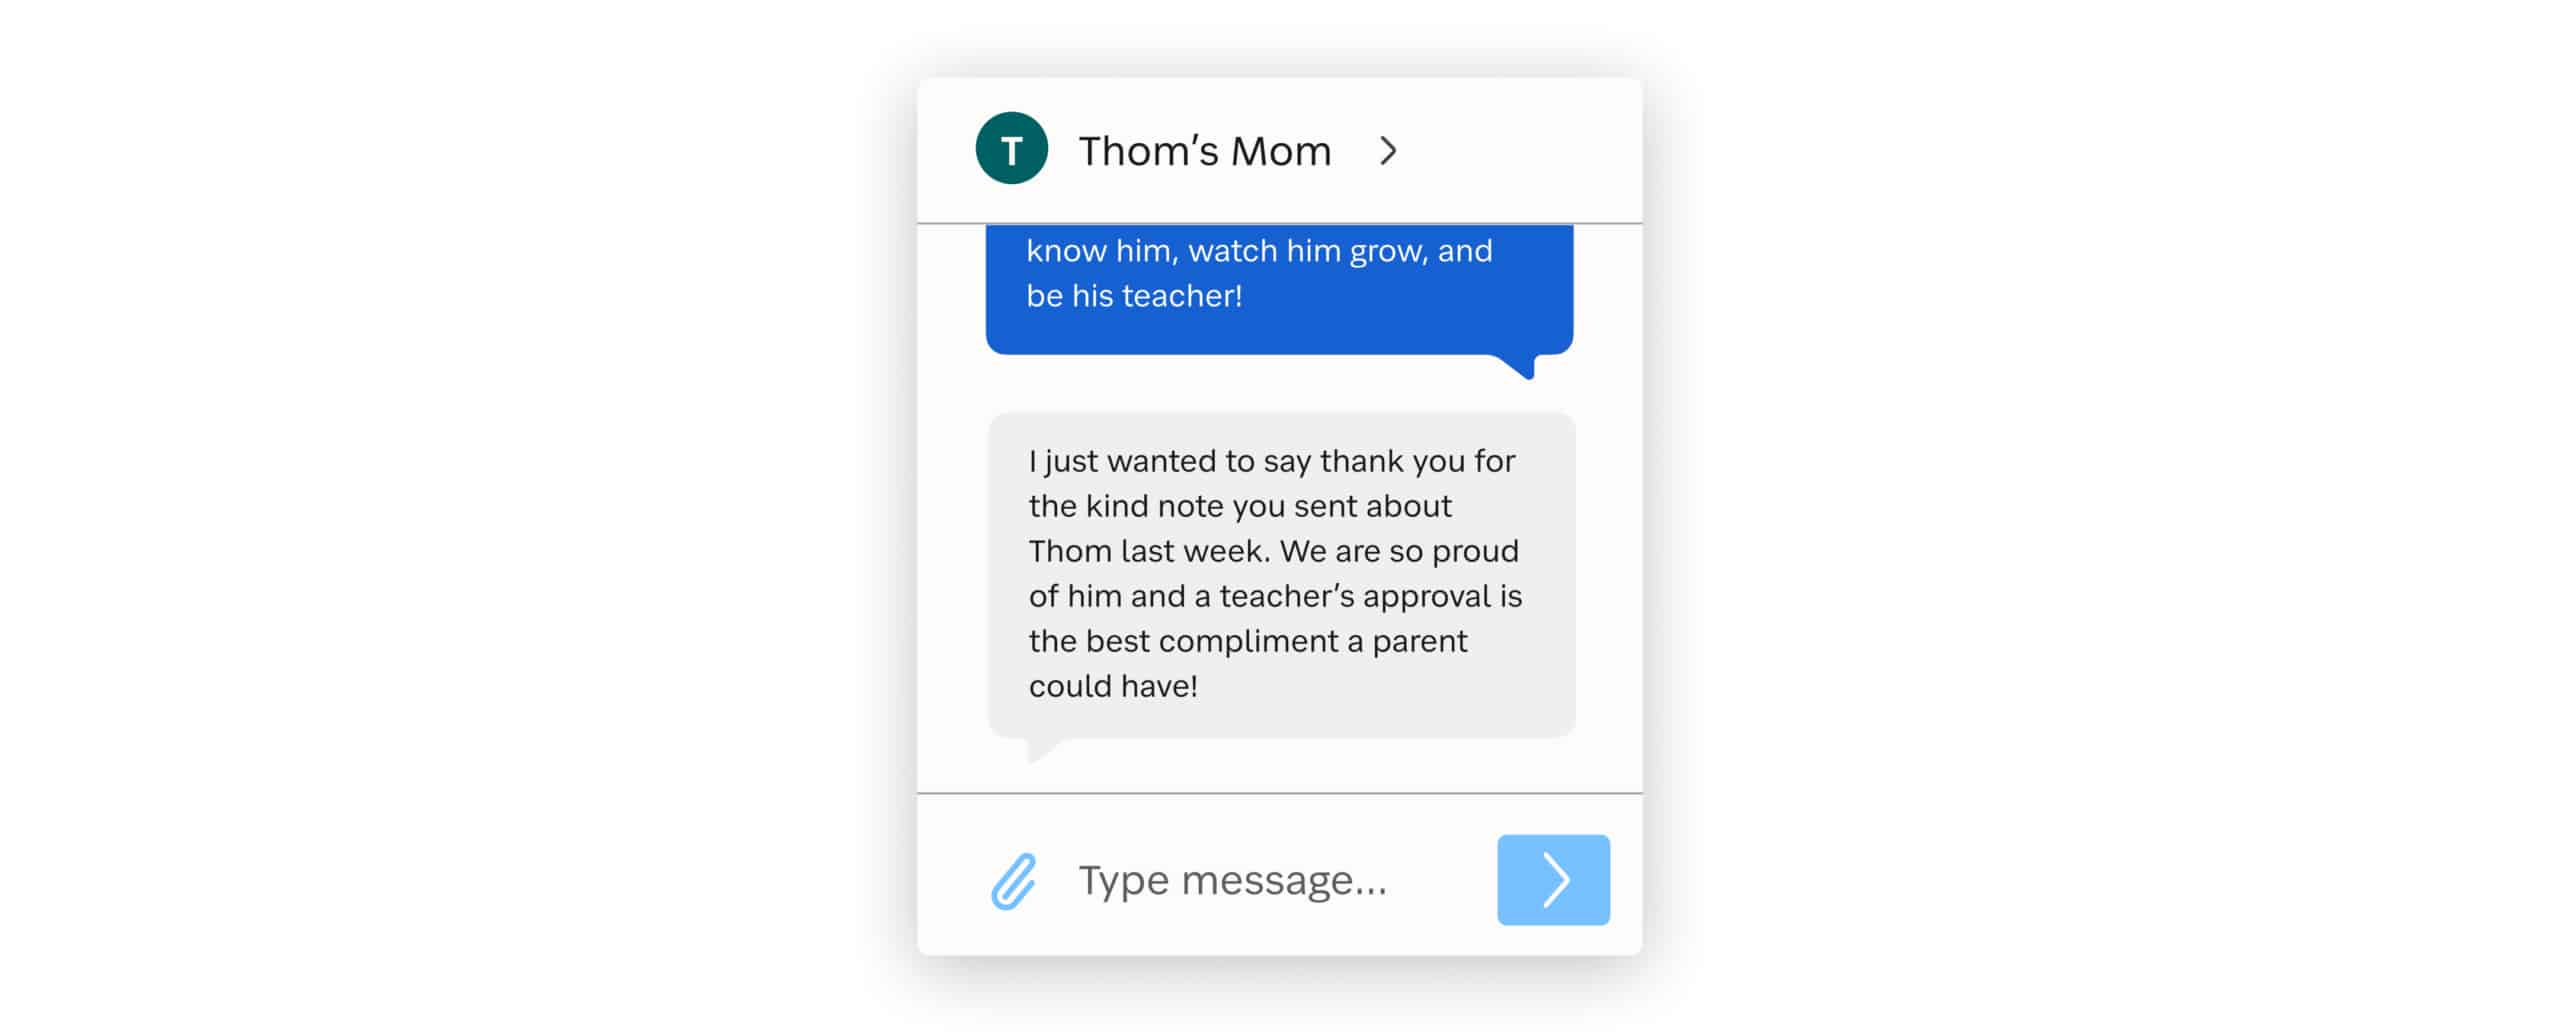 Thom's Mom writes message to teacher thanking them about their compliment.